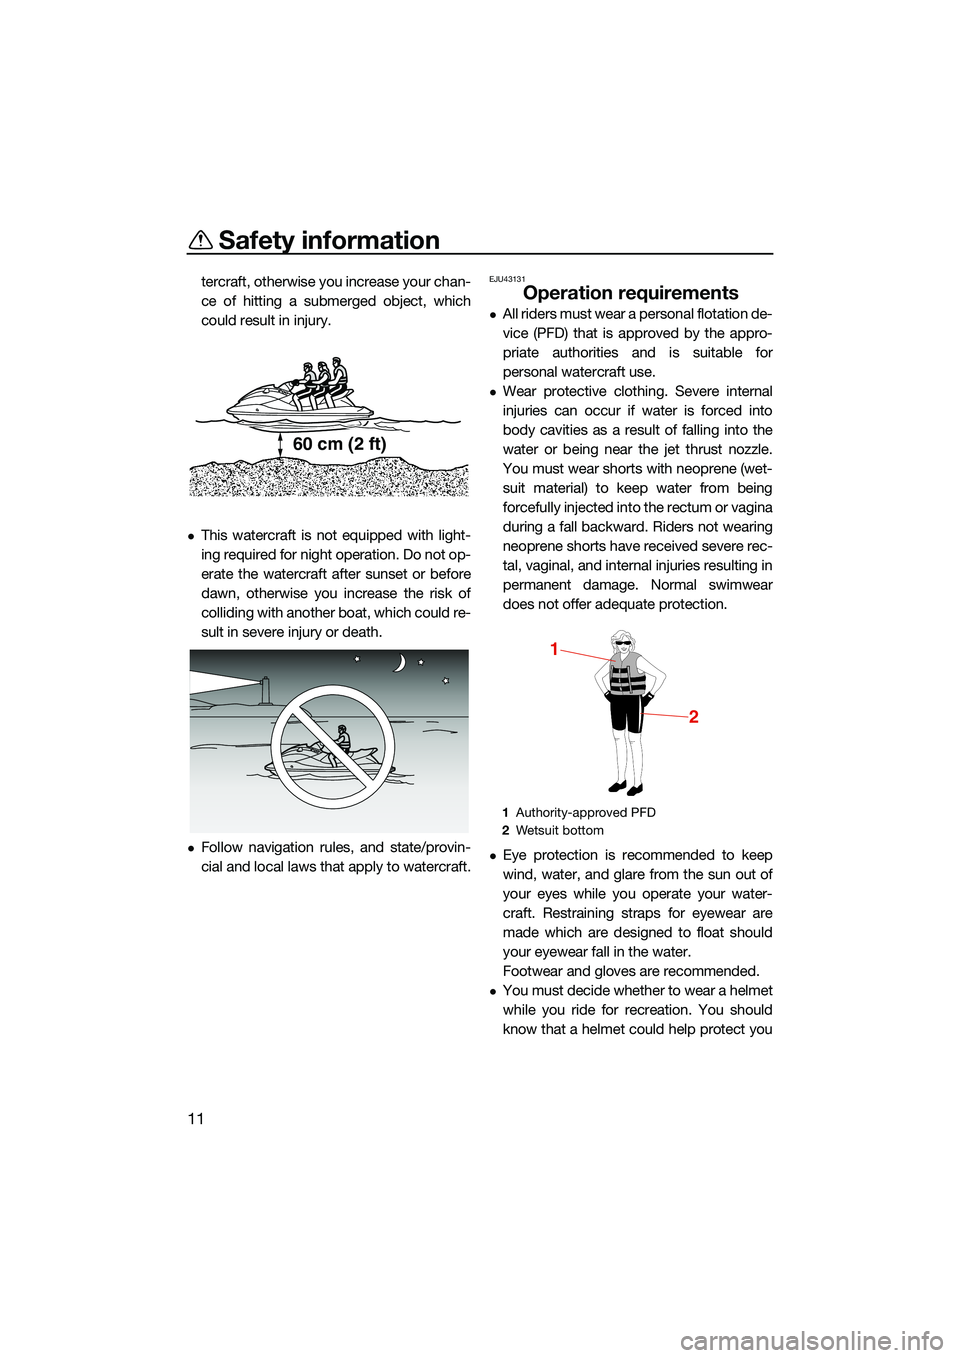 YAMAHA FX SVHO 2022  Owners Manual Safety information
11
tercraft, otherwise you increase your chan-
ce of hitting a submerged object, which
could result in injury.
This watercraft is not equipped with light-
ing required for night 